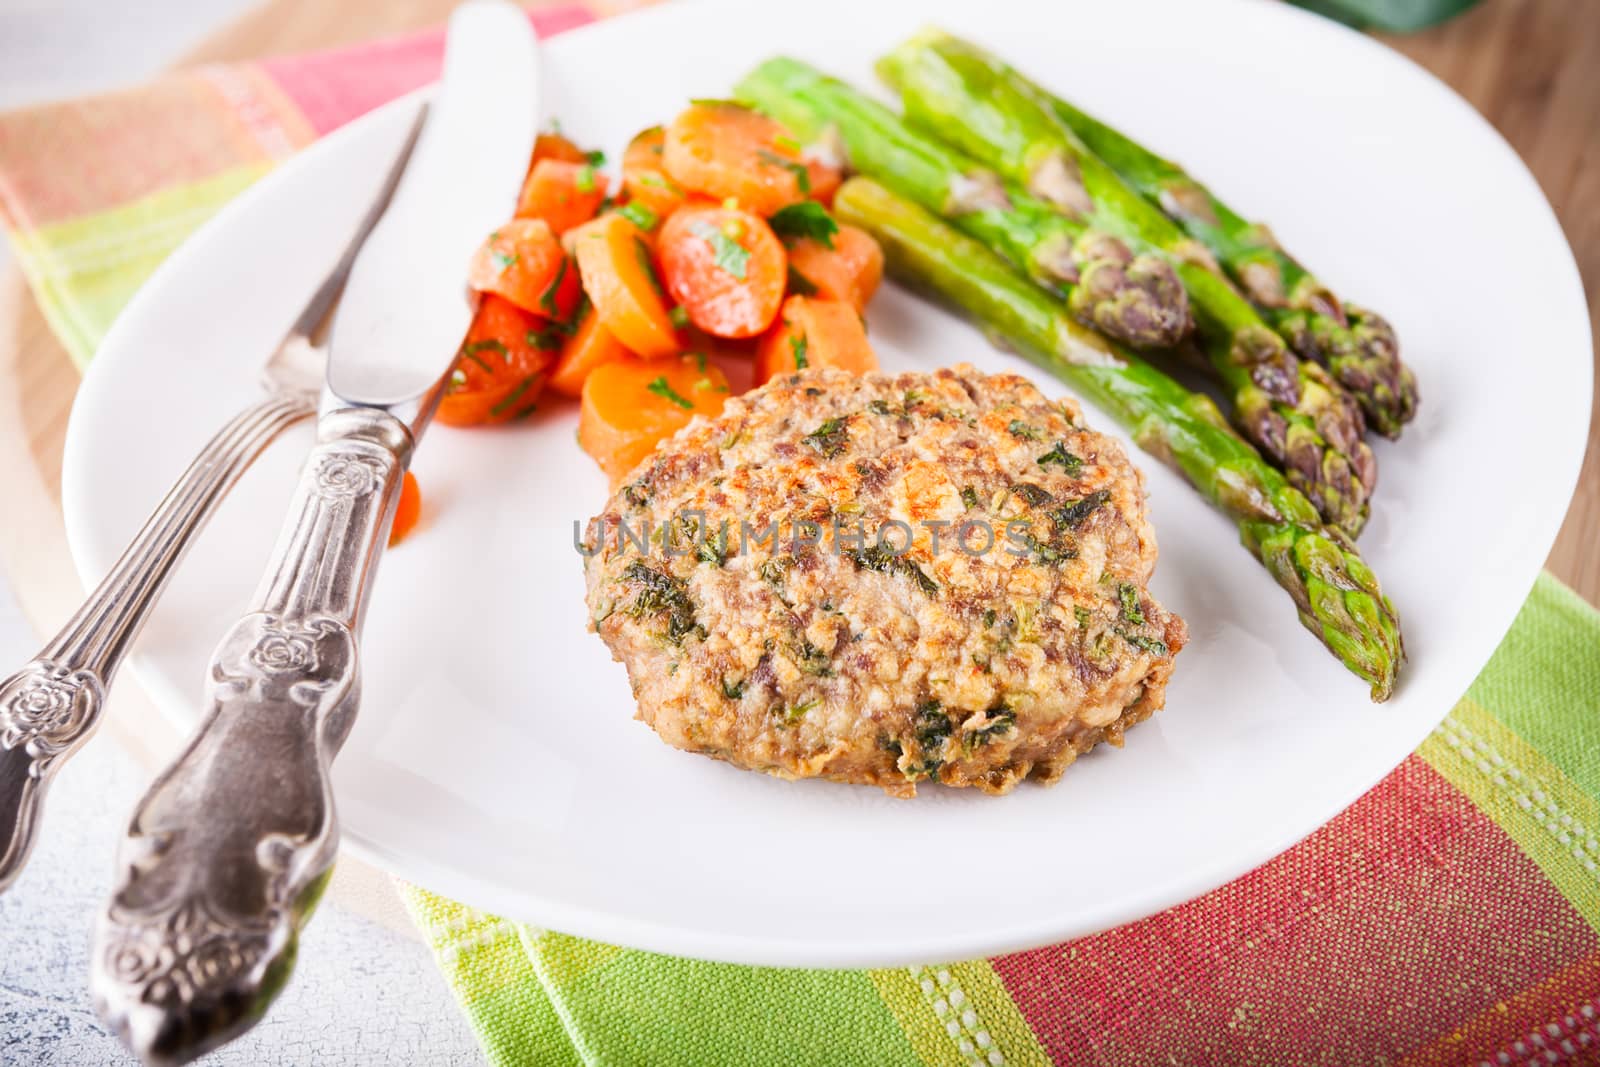 Meat rissole with glazed carrots by supercat67